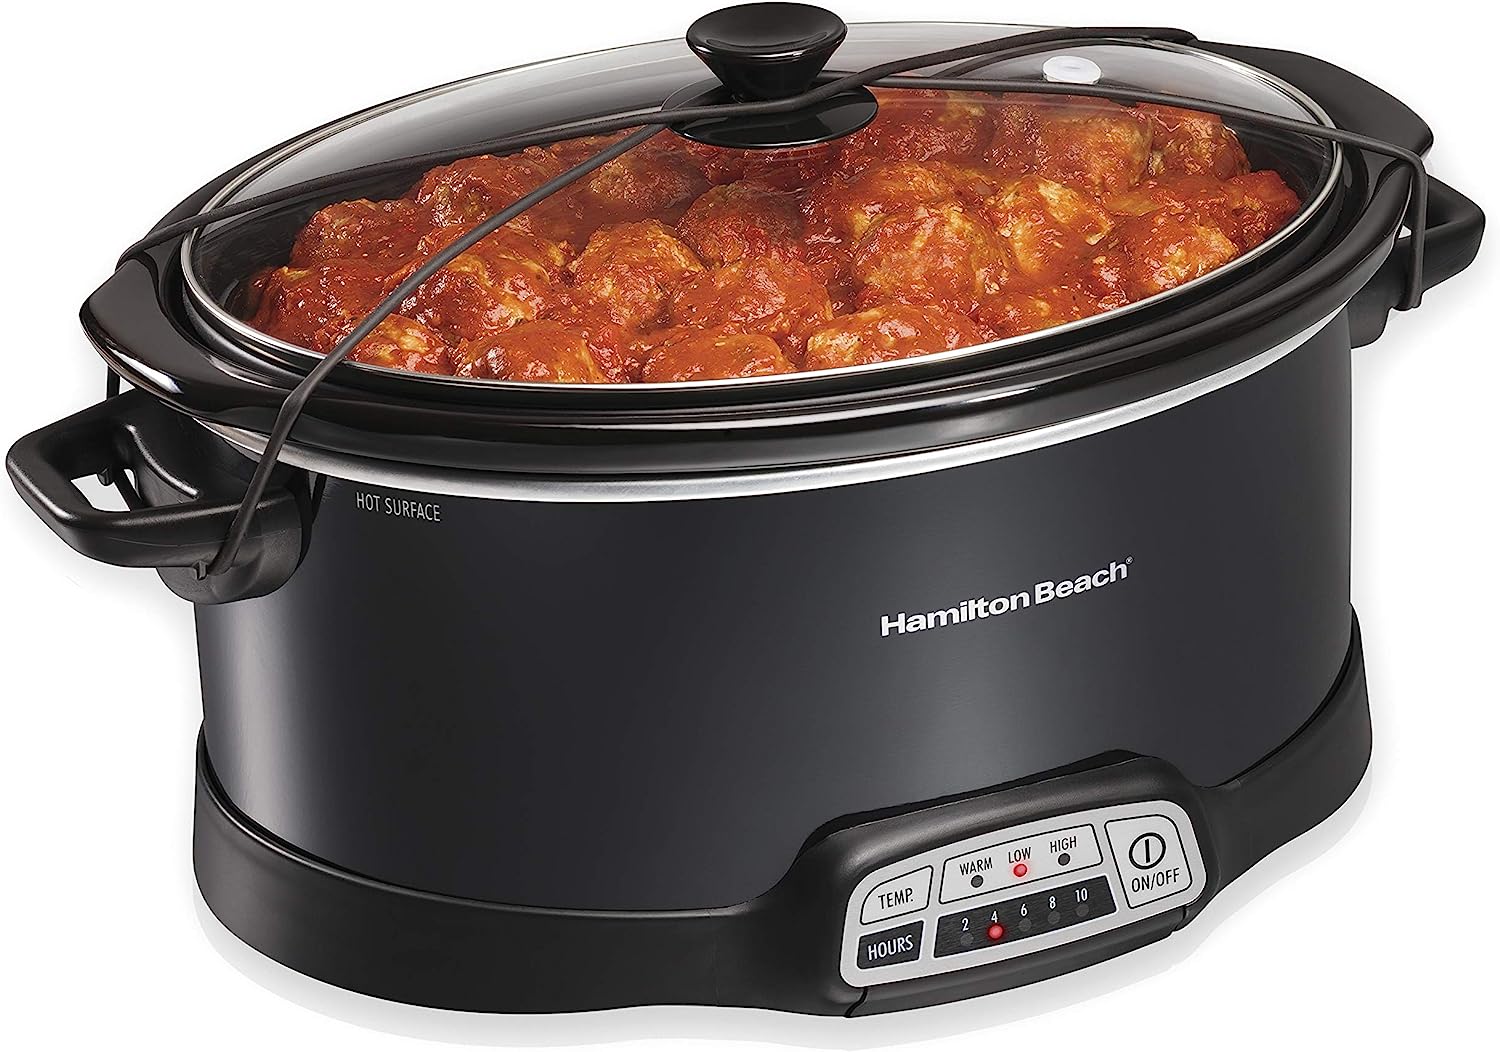 How Long To Cook Meatballs In Slow Cooker